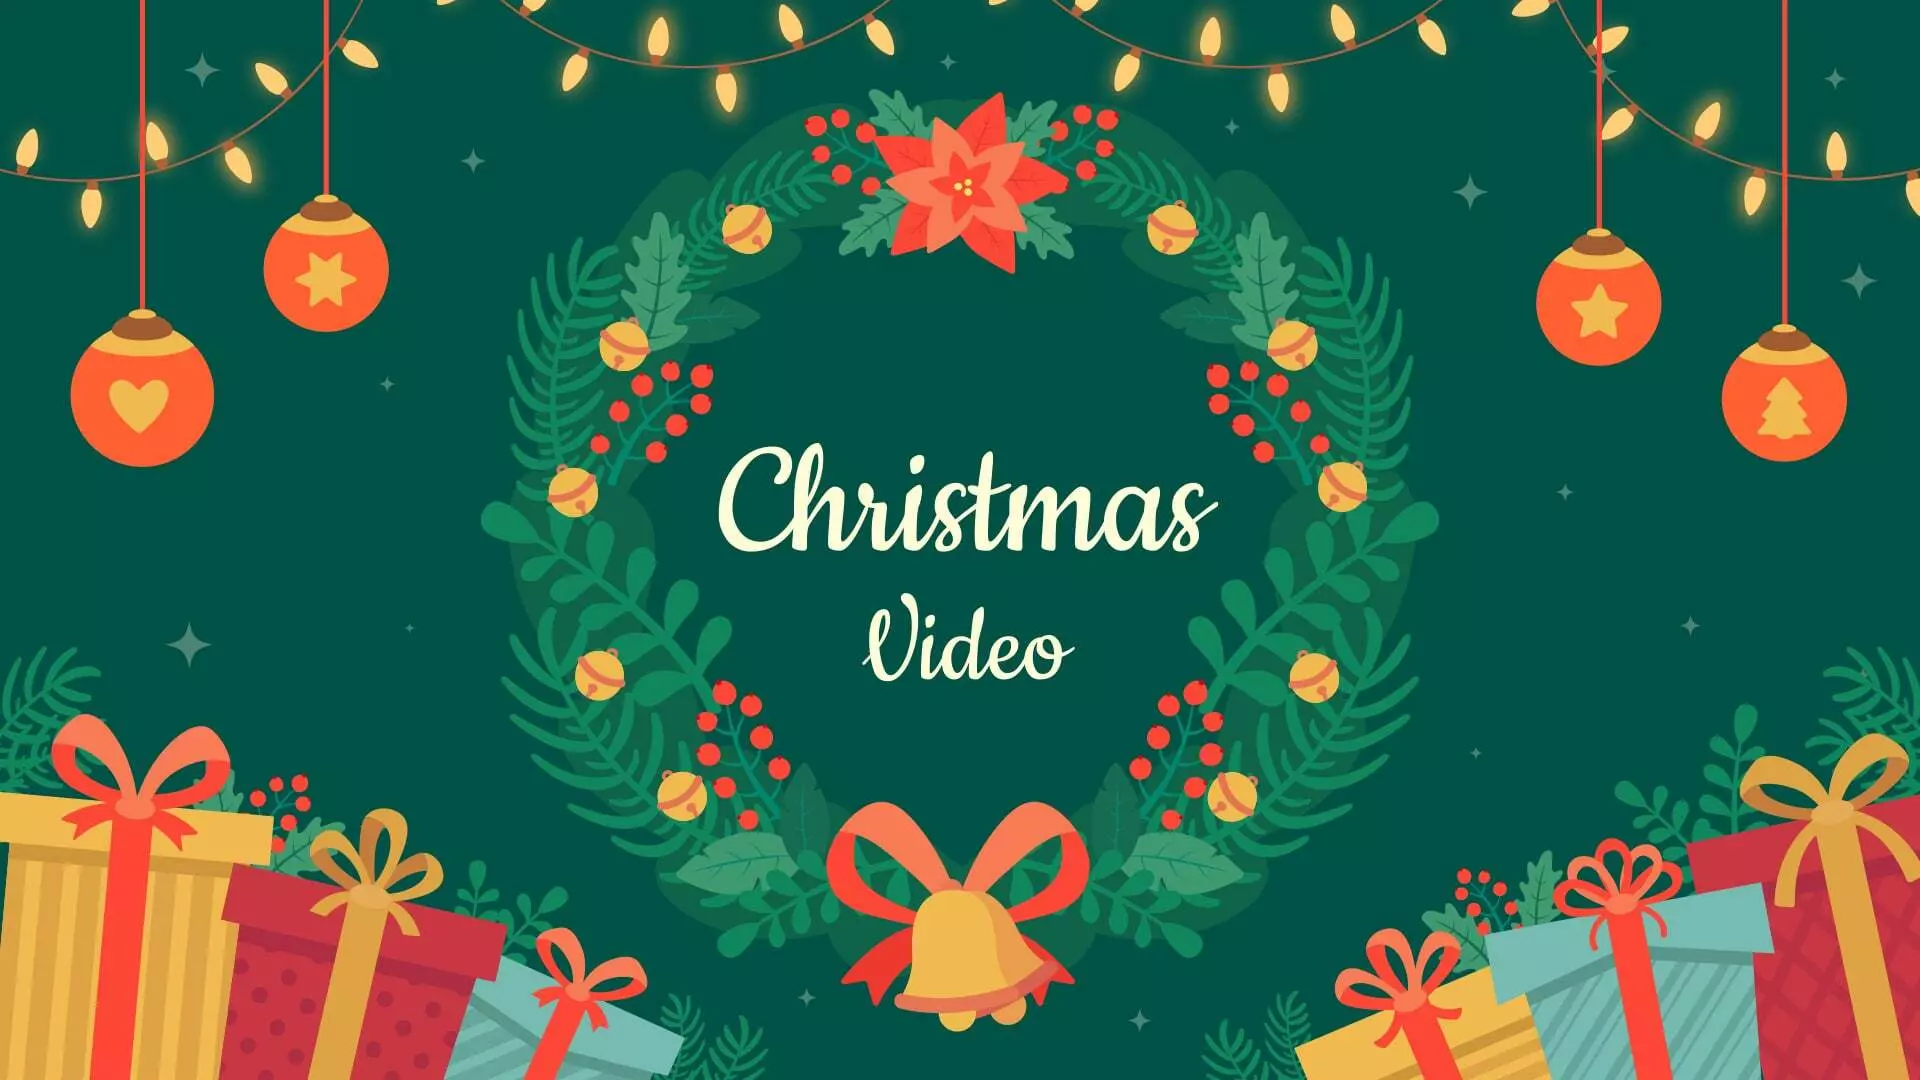 Christmas Video Maker – Create Your Own Christmas Greeting